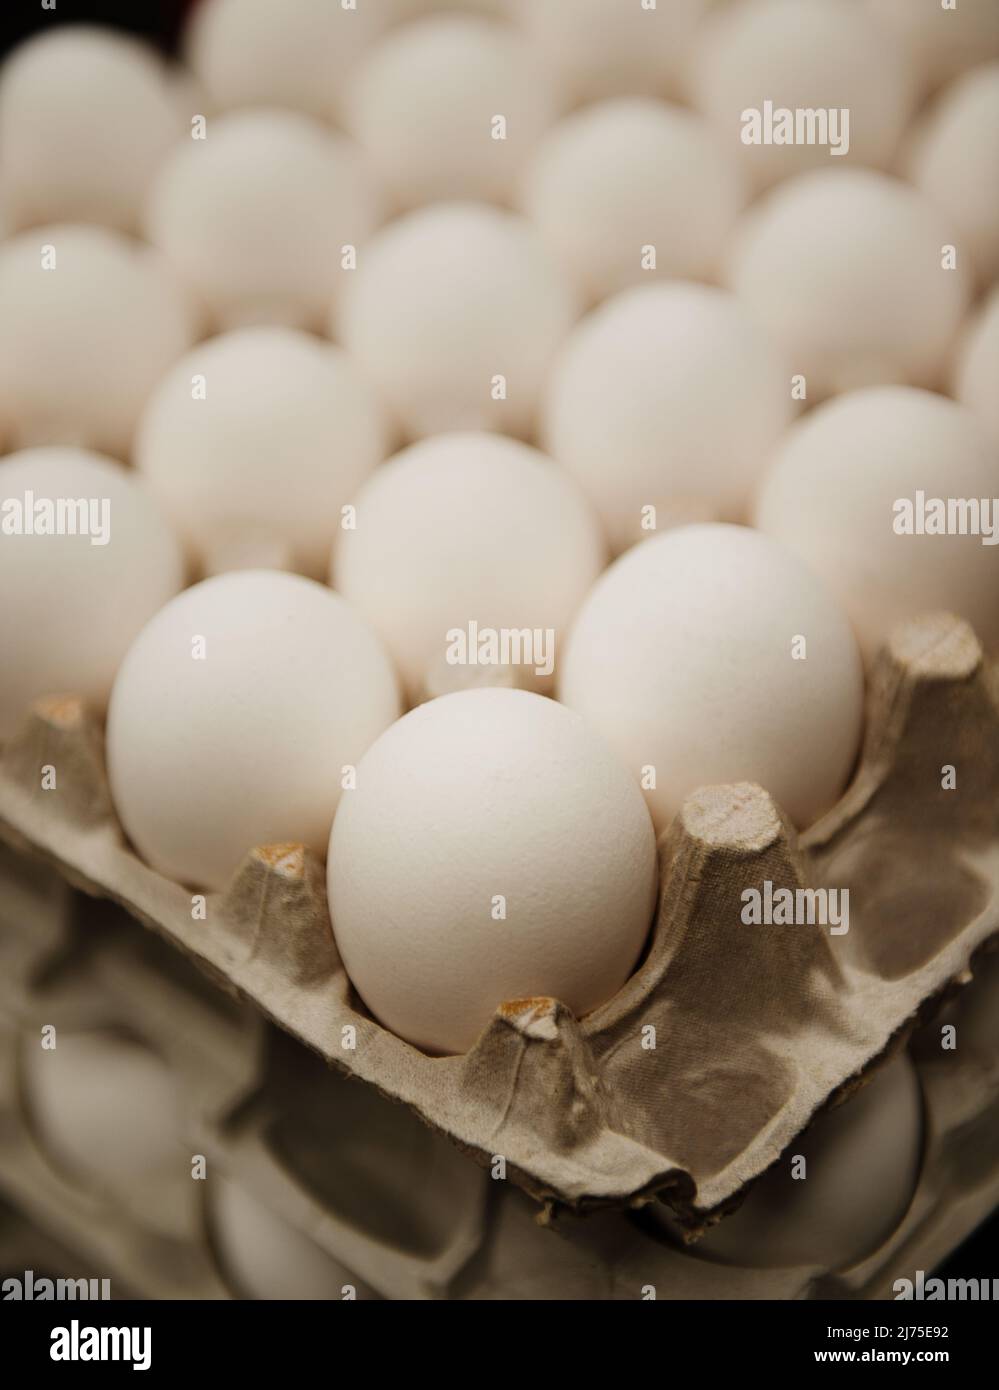 crates of eggs stacked in an industrial kitchen Stock Photo